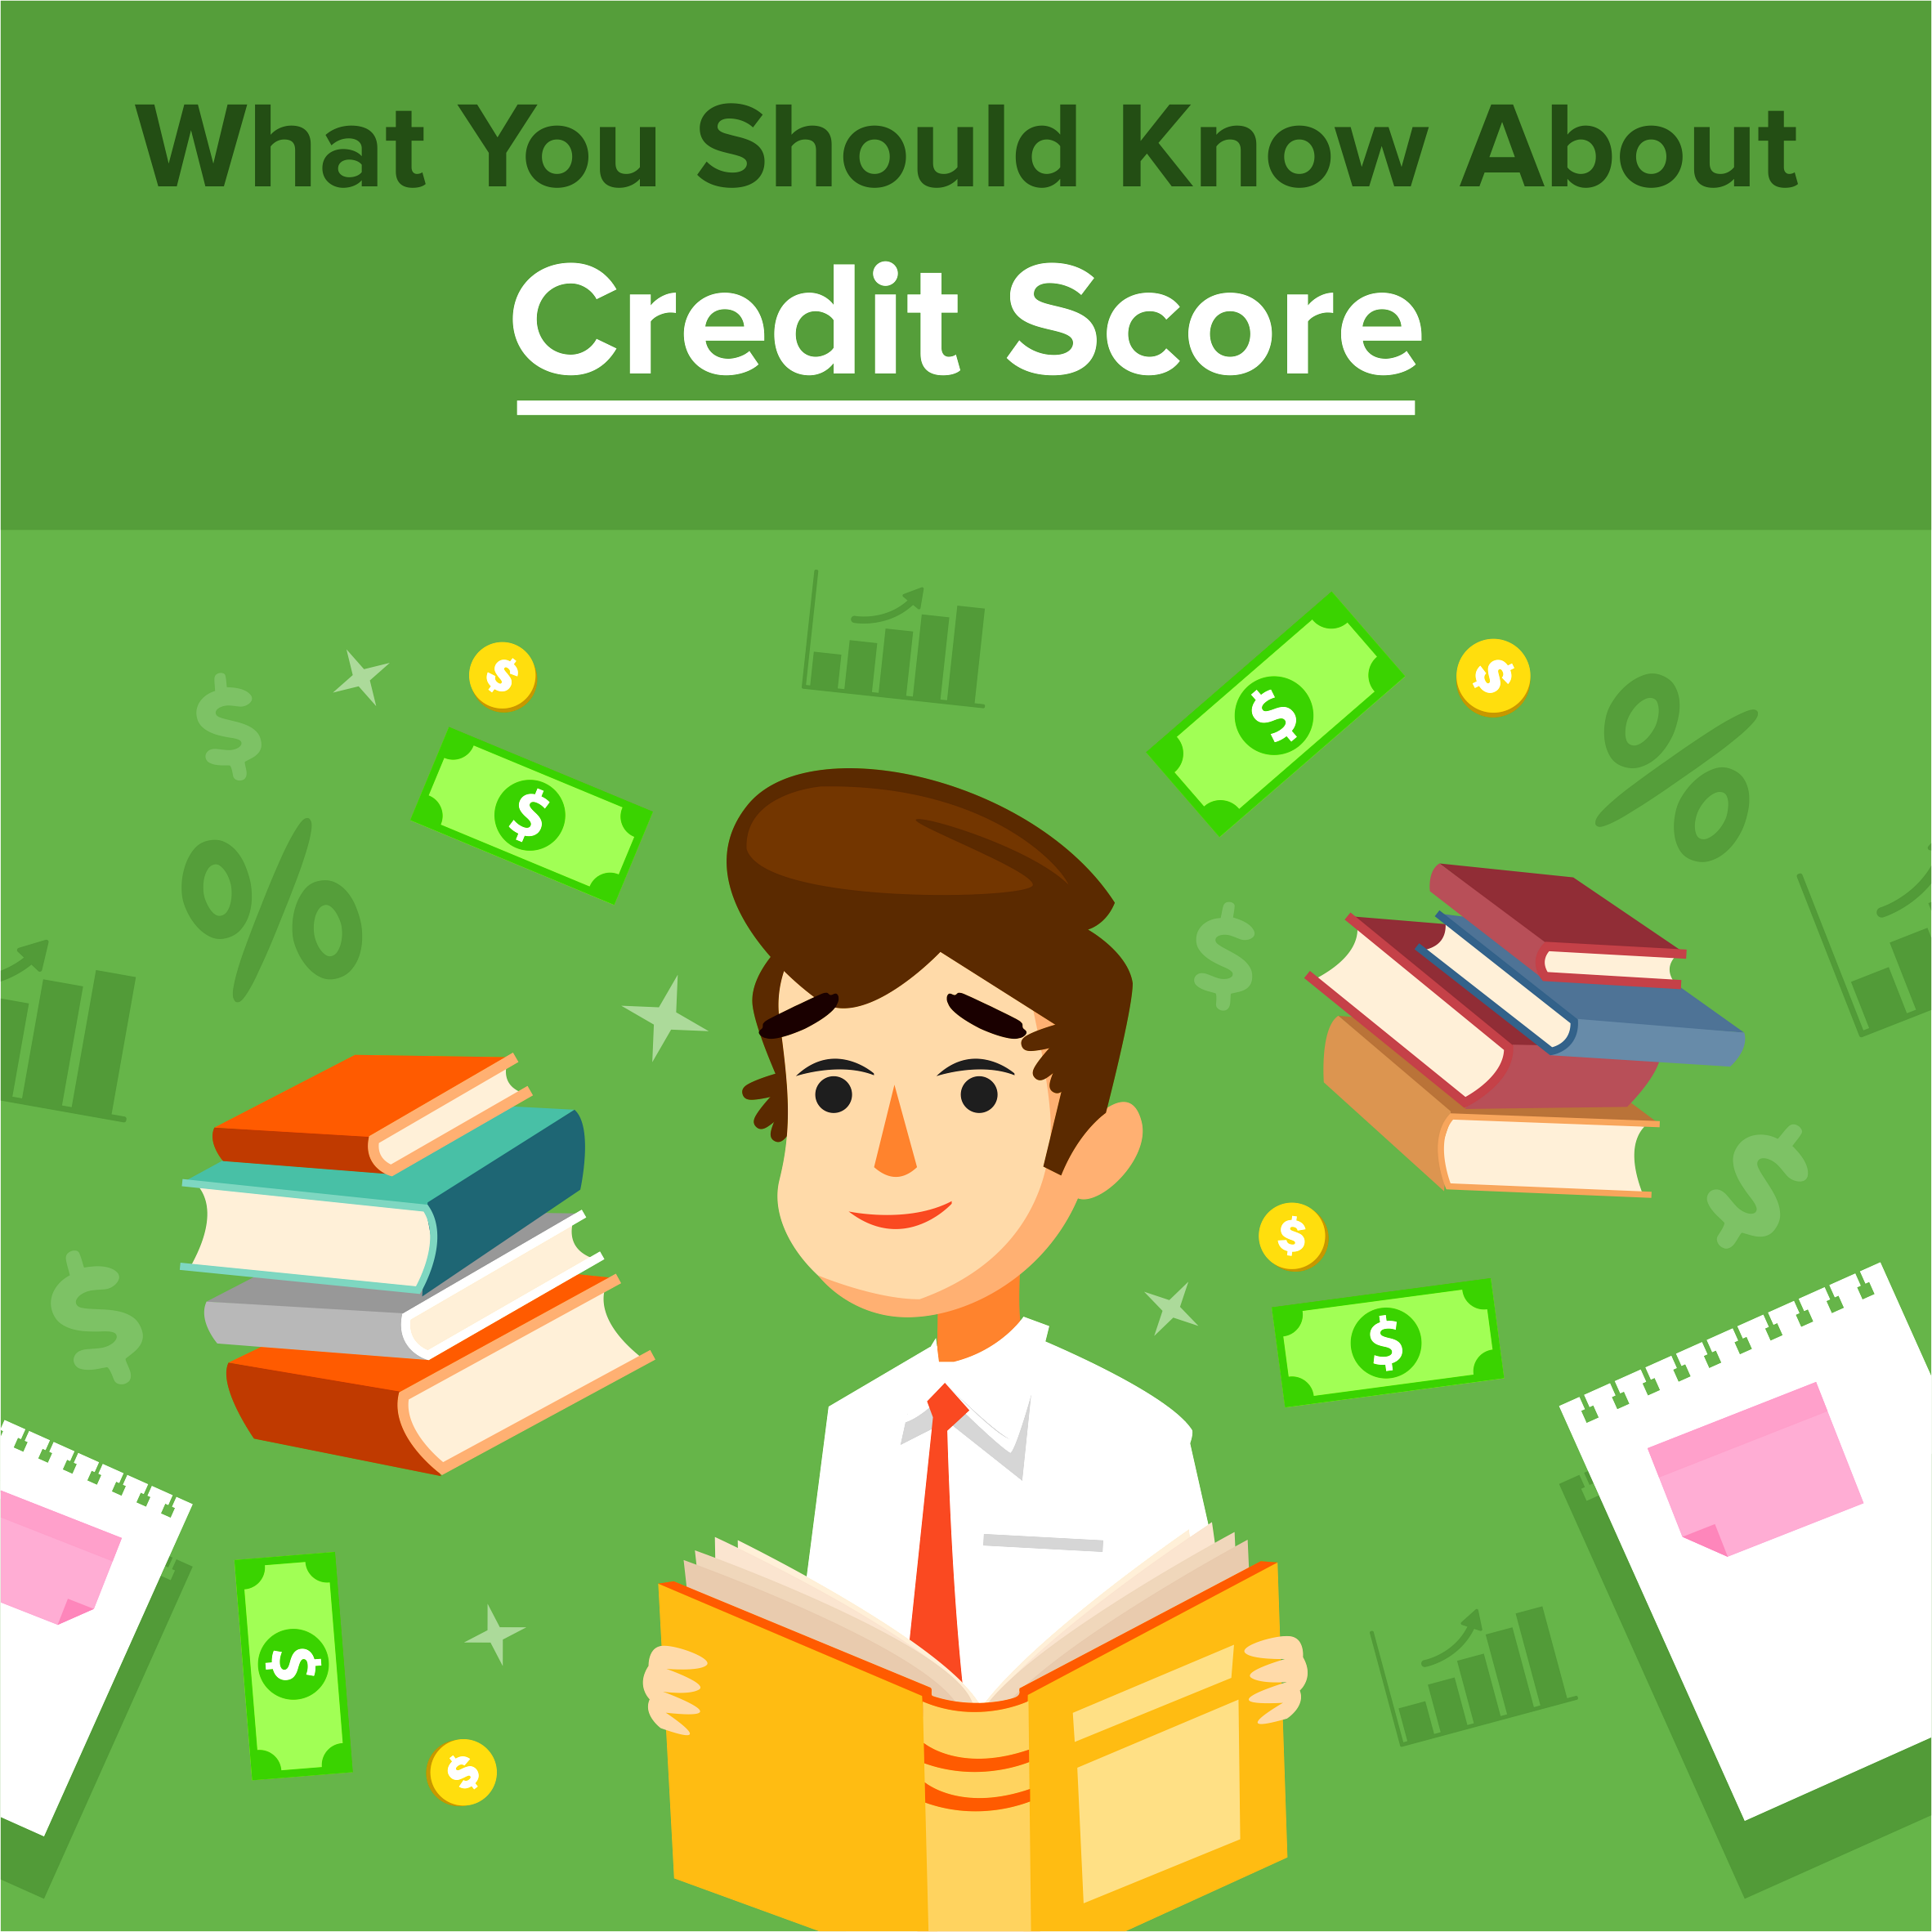 What You Should Know About Credit Score